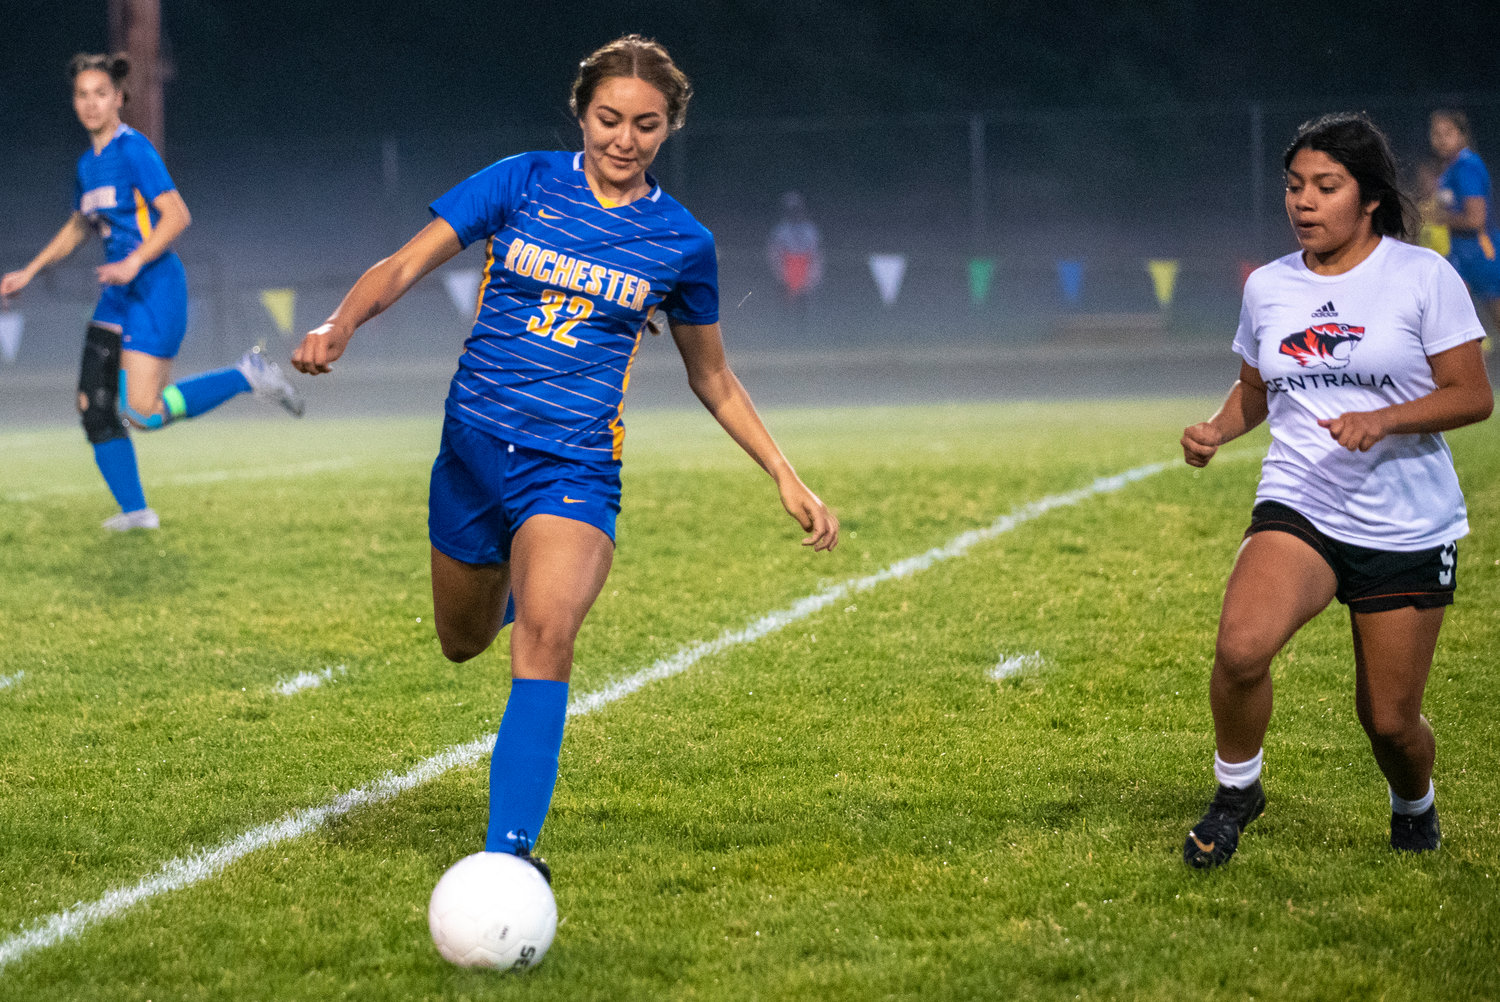 Rochester's Nadia Martinez (32) collects a pass from a teammate with Centralia's Alia Gomez-Ortiz (9) defending on Thursday.